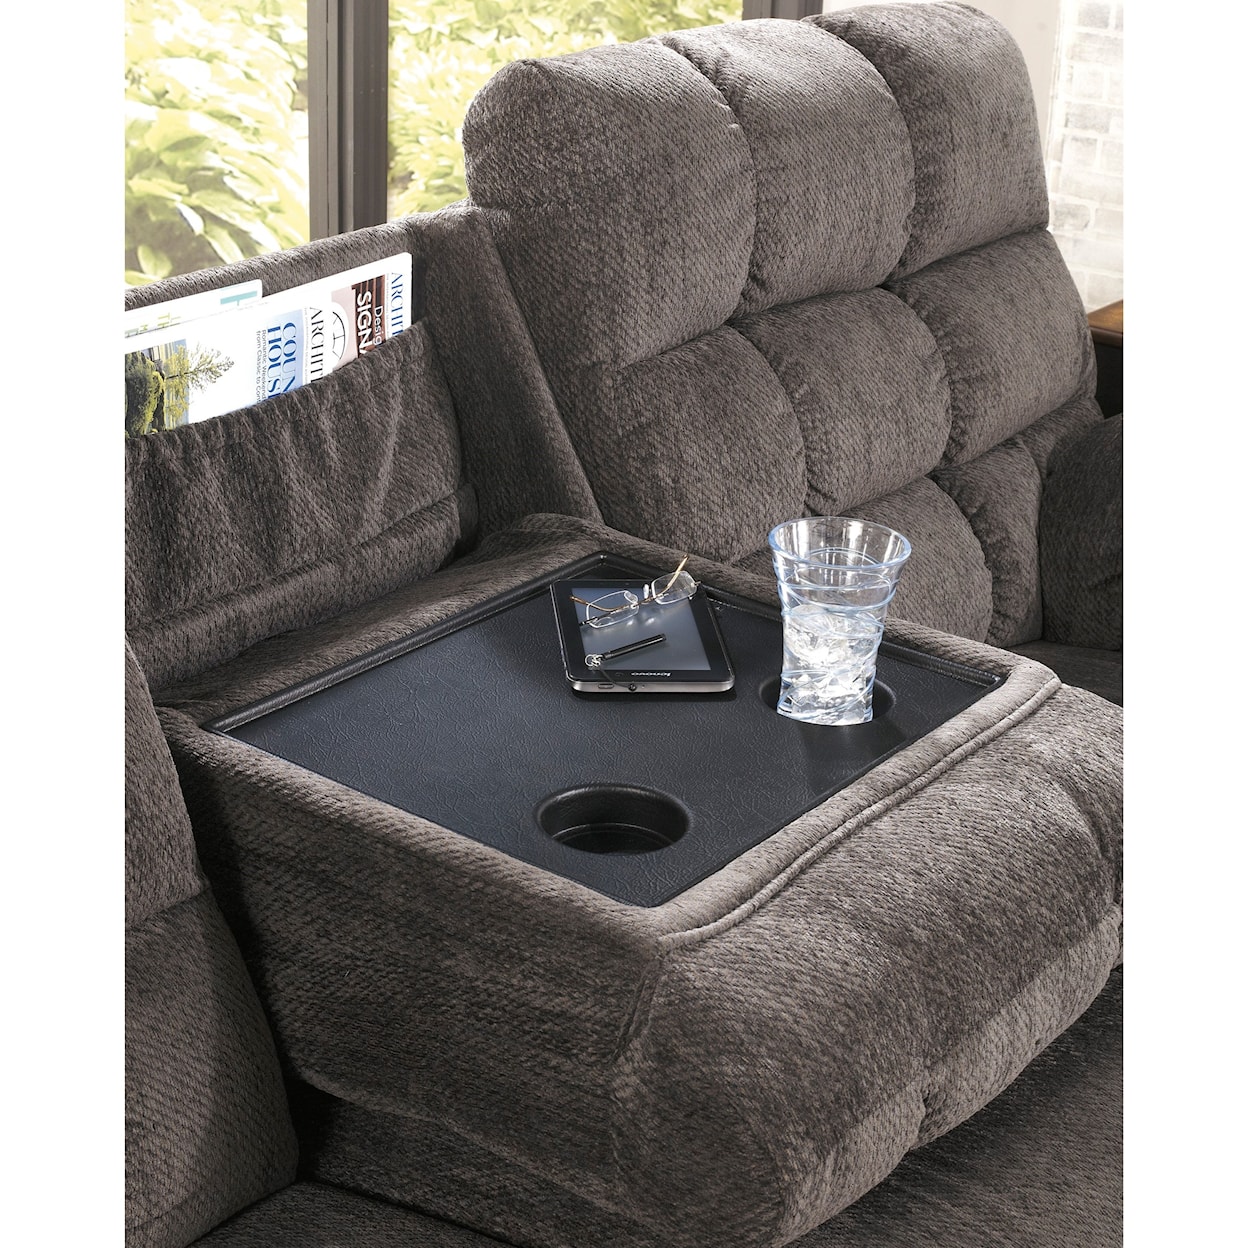 Ashley Furniture Signature Design Acieona Reclining Sectional with Right Side Loveseat